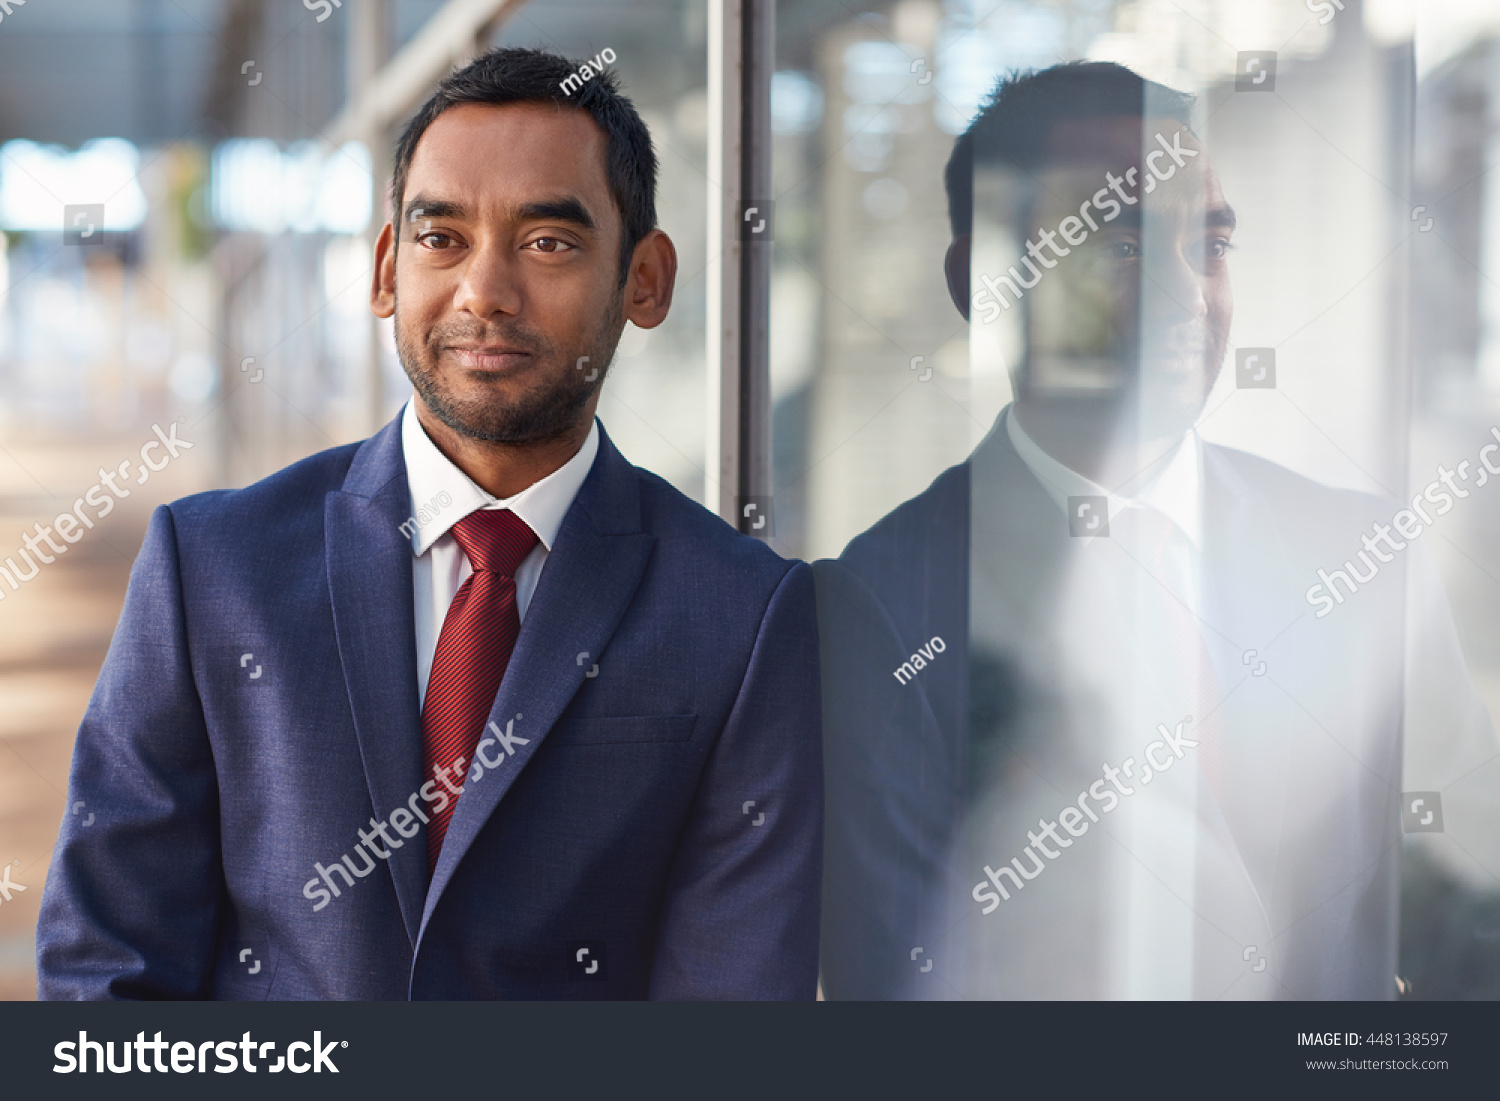 Reflecting on his business success #448138597